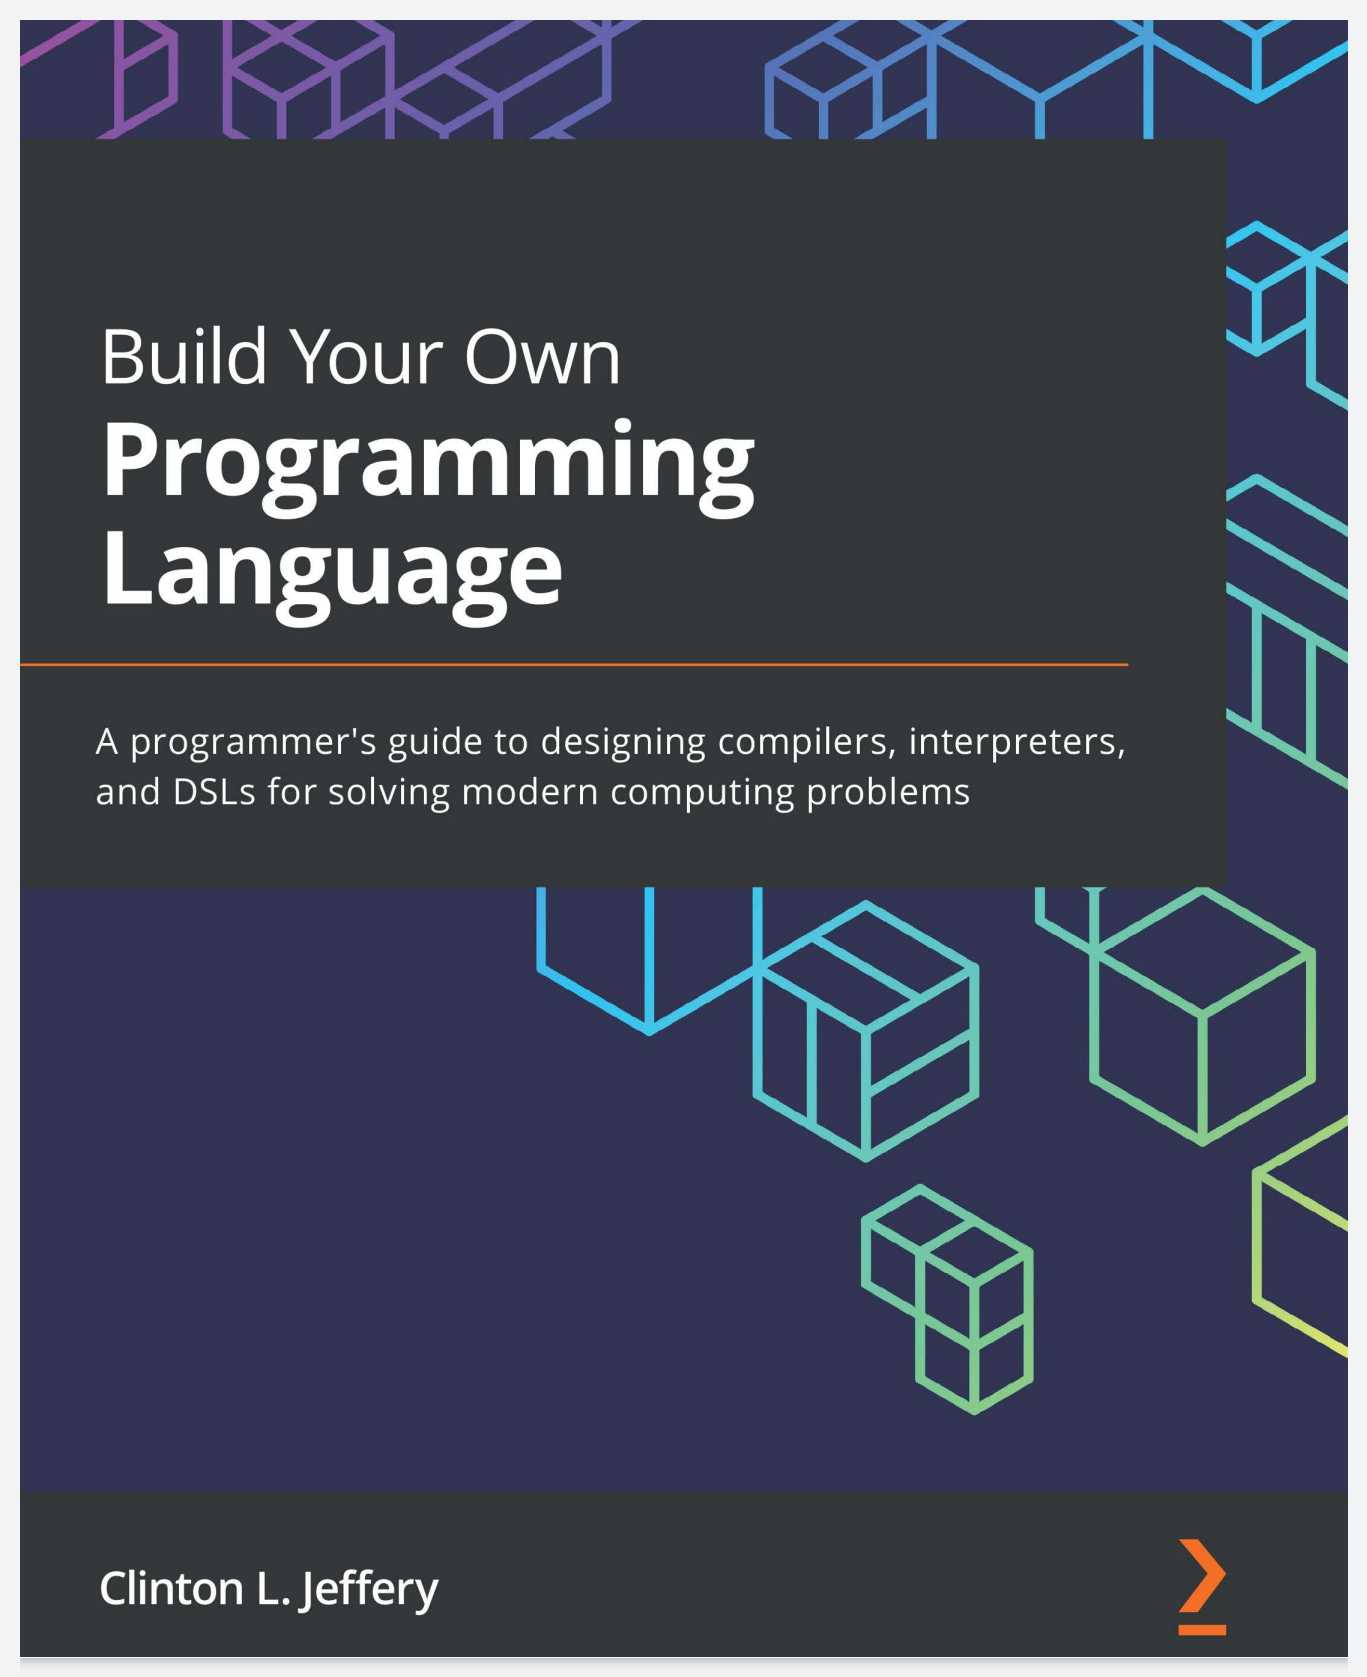 Build Your Own Programming Language: A programmer’s guide to designing compilers, interpreters, and DSLs for solving modern computing problems